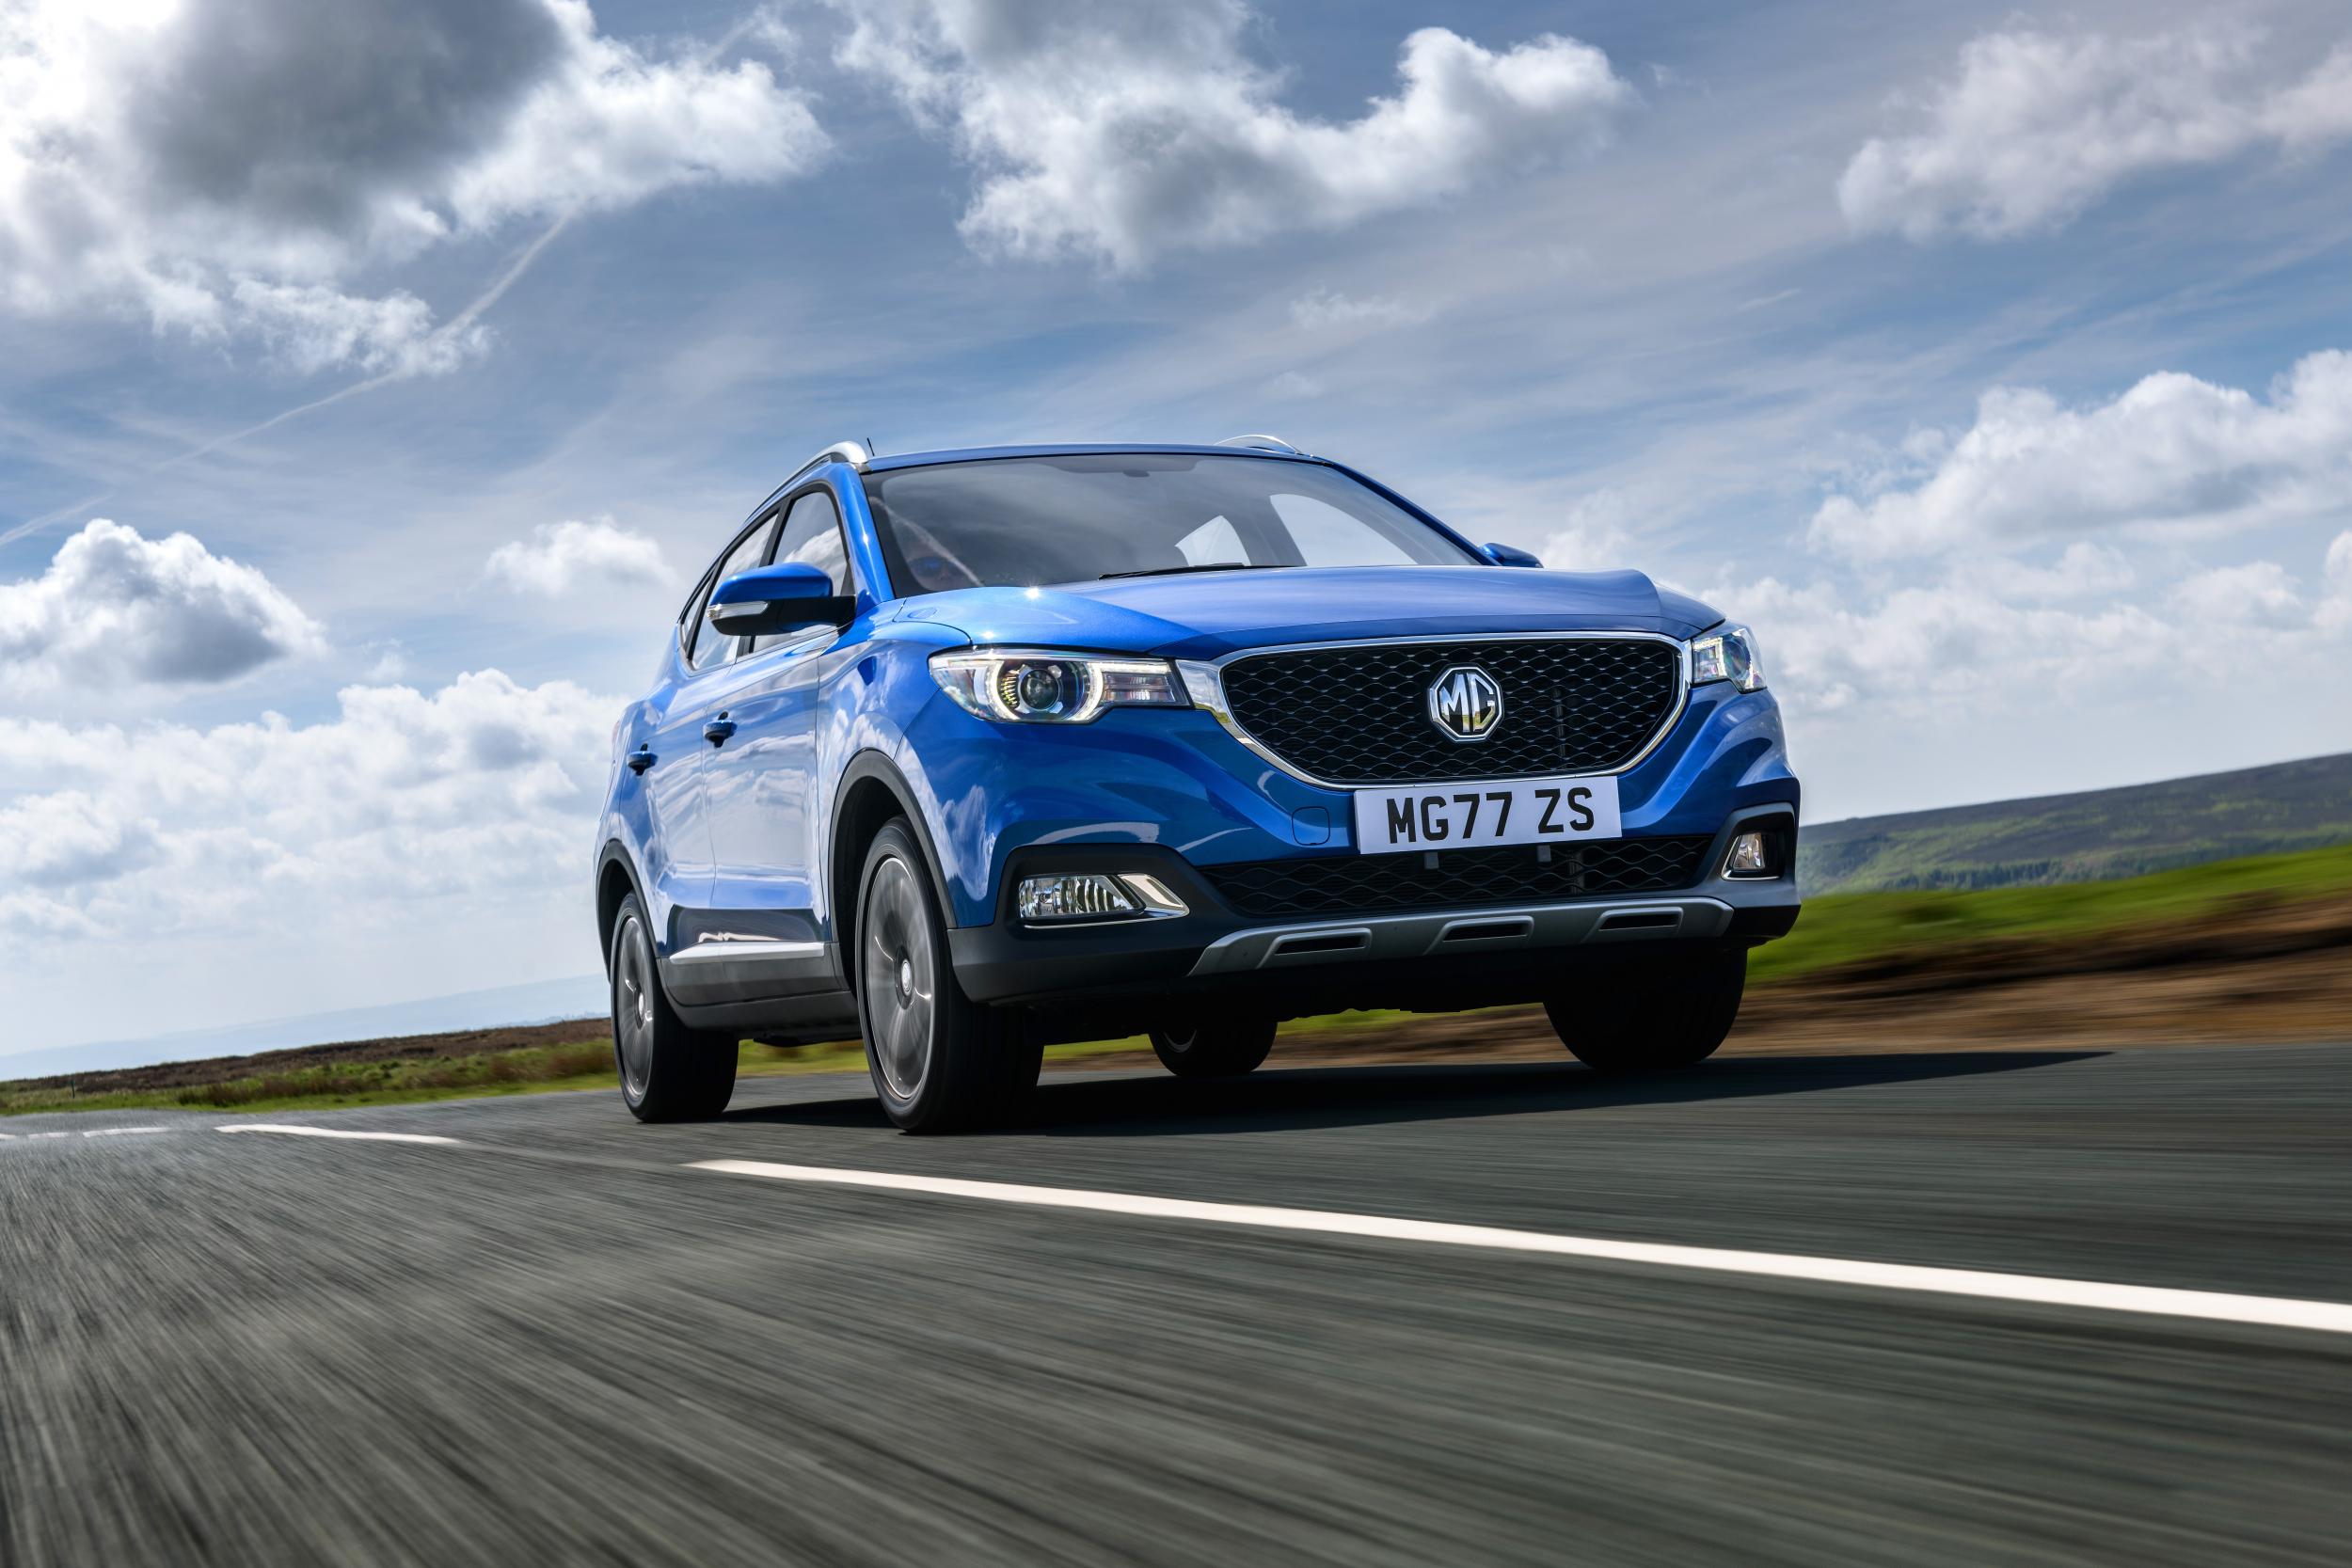 Mg Zs Review A Reasonably Priced Compact Suv But A Bit